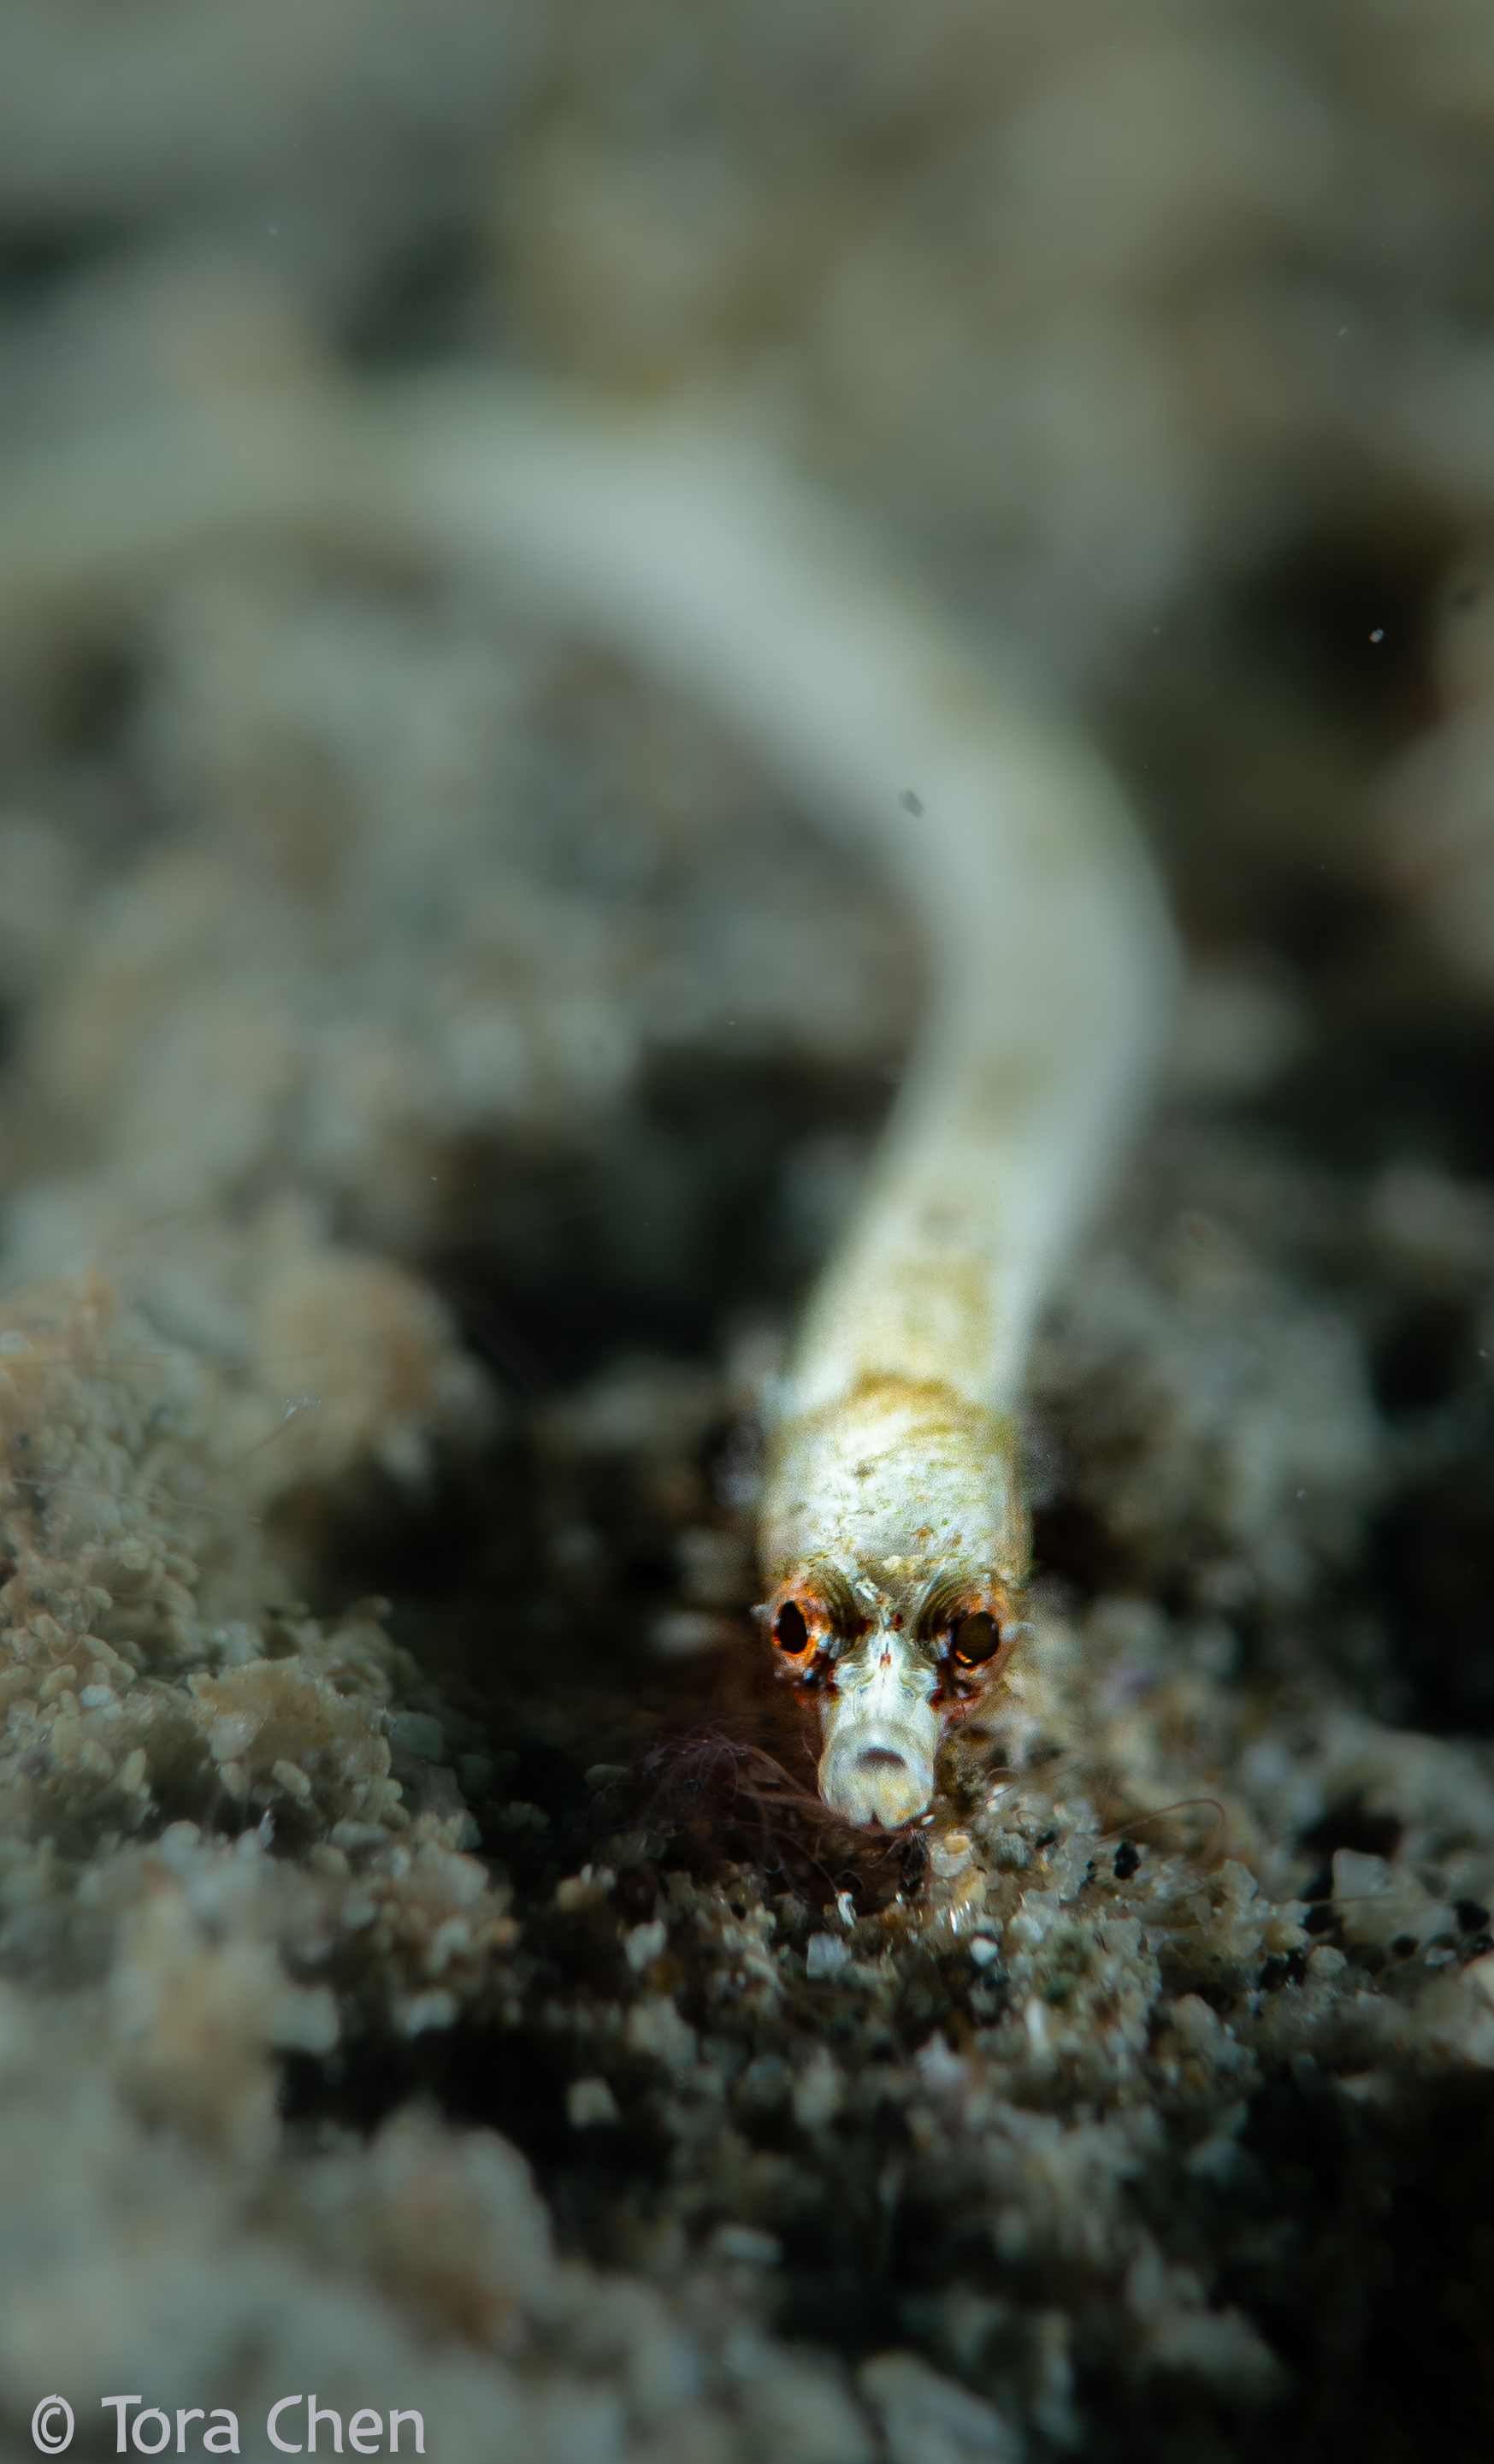 A Normal White Pipefish